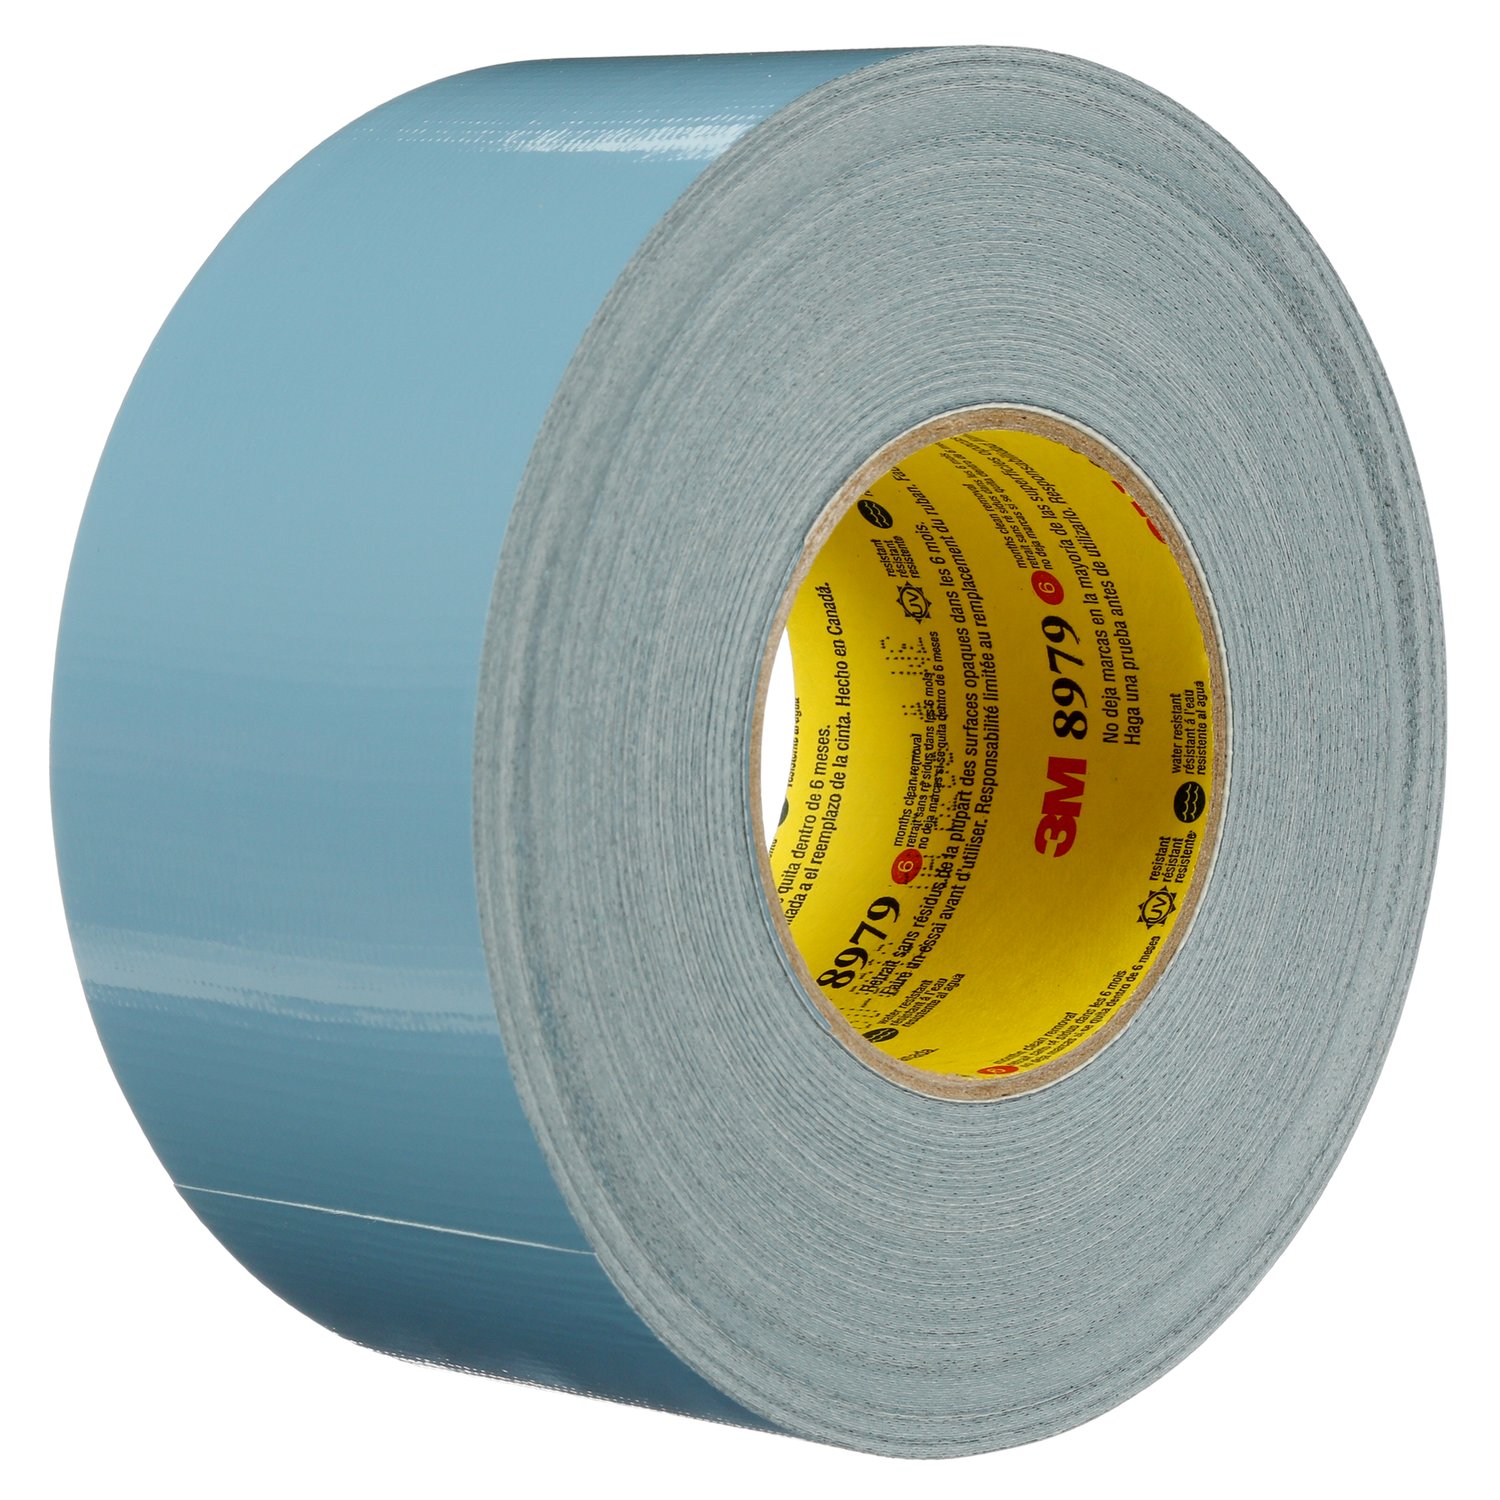 7000001330 - 3M Performance Plus Duct Tape 8979, Slate Blue, 48 mm x 54.8 m, 12.1
mil, 24 Roll/Case, Conveniently Packaged